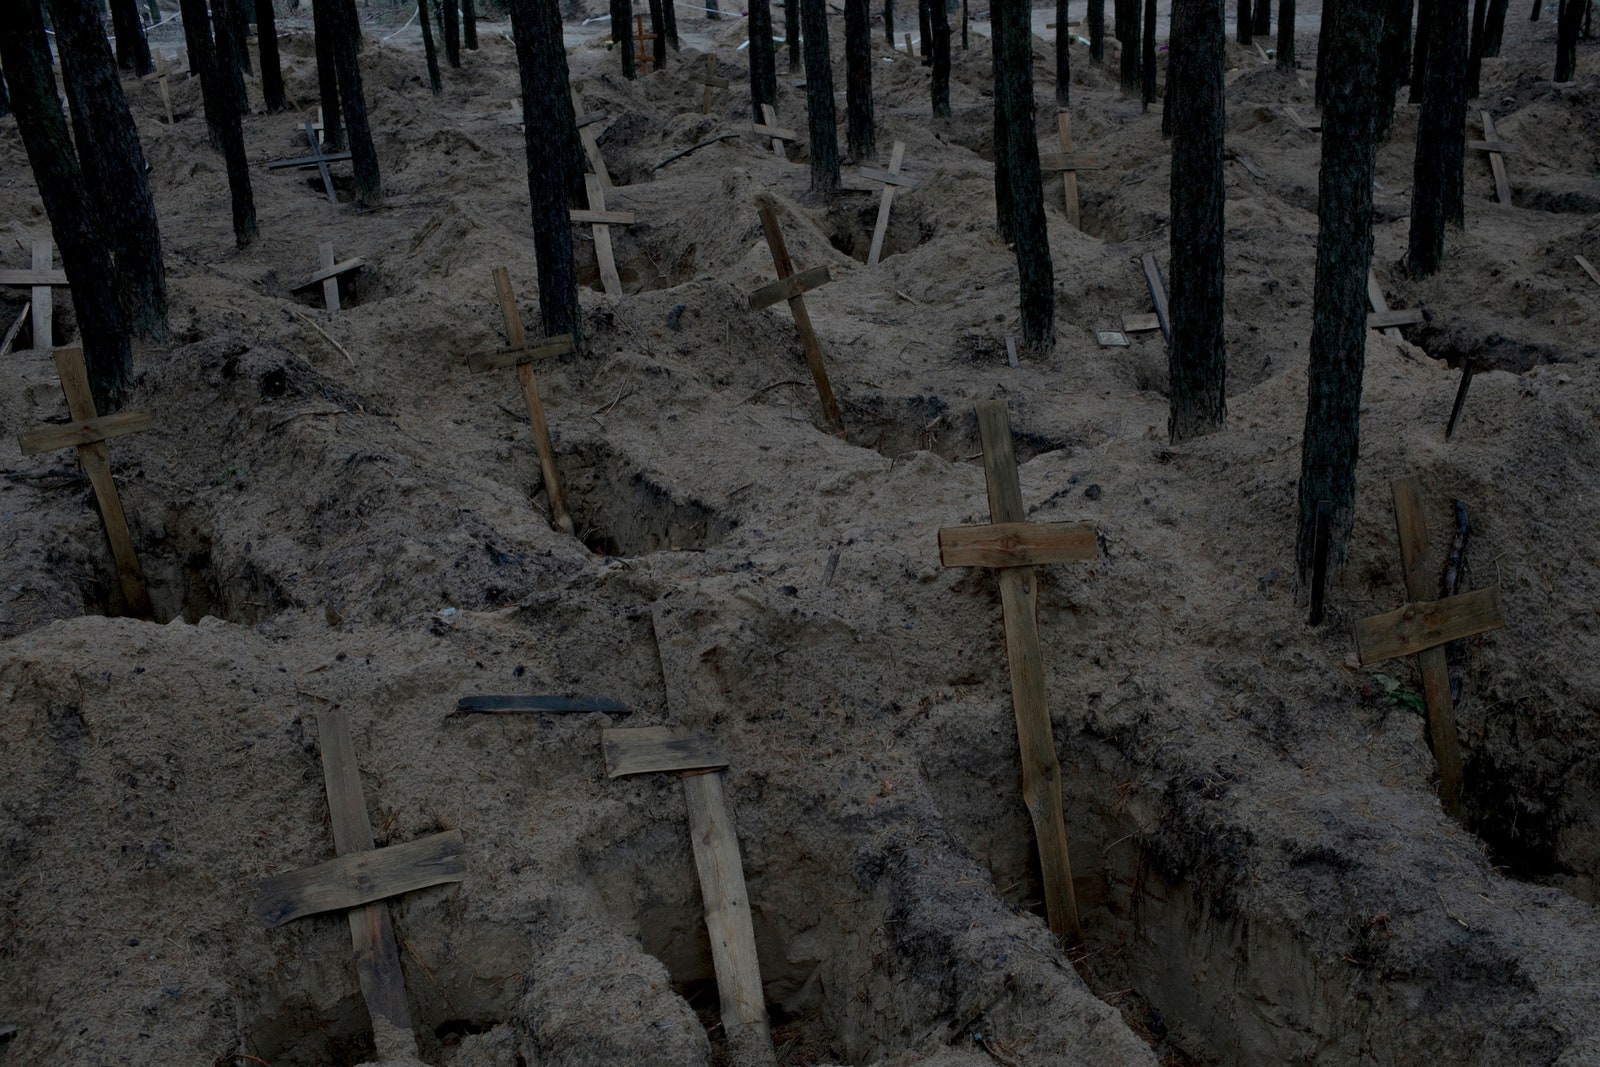 Rows of open graves with wooden crucifixes in a forest.